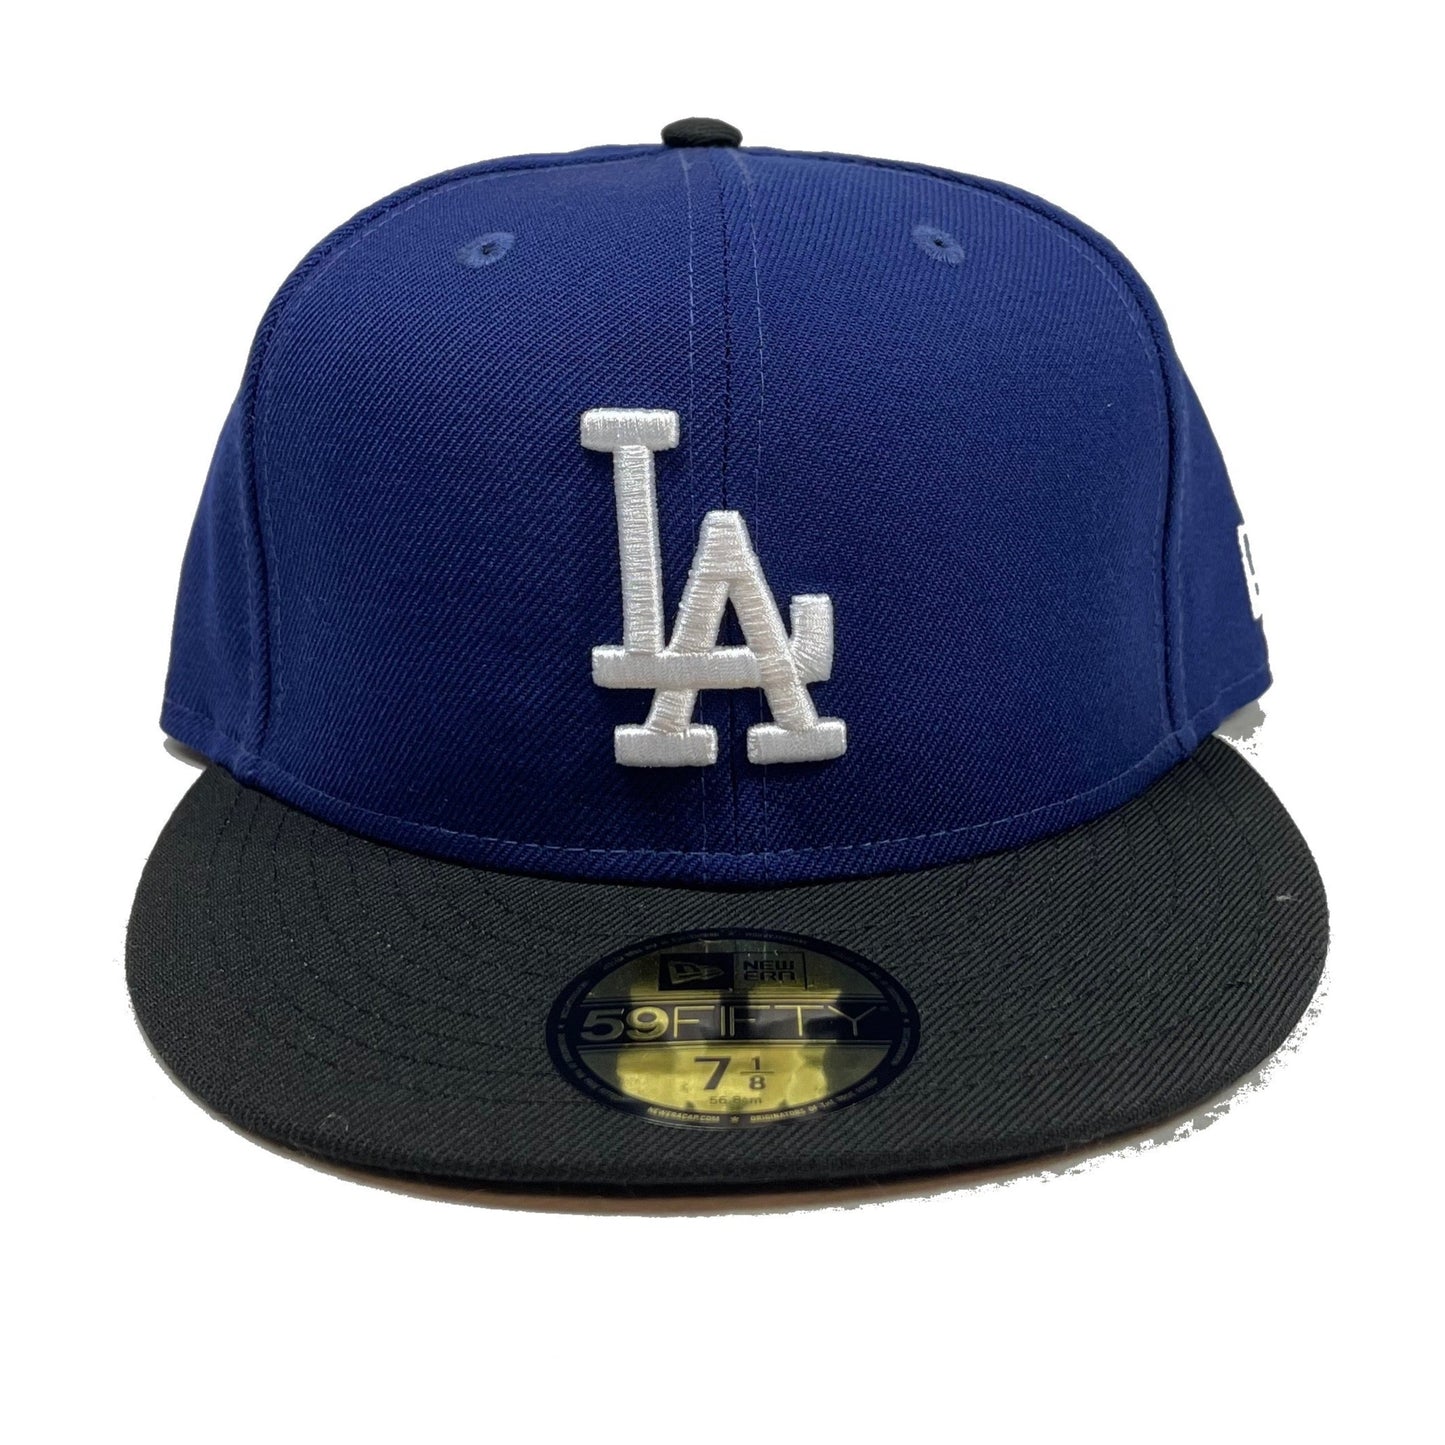 Los Angeles Dodgers (Blue) Snapback/Fitted